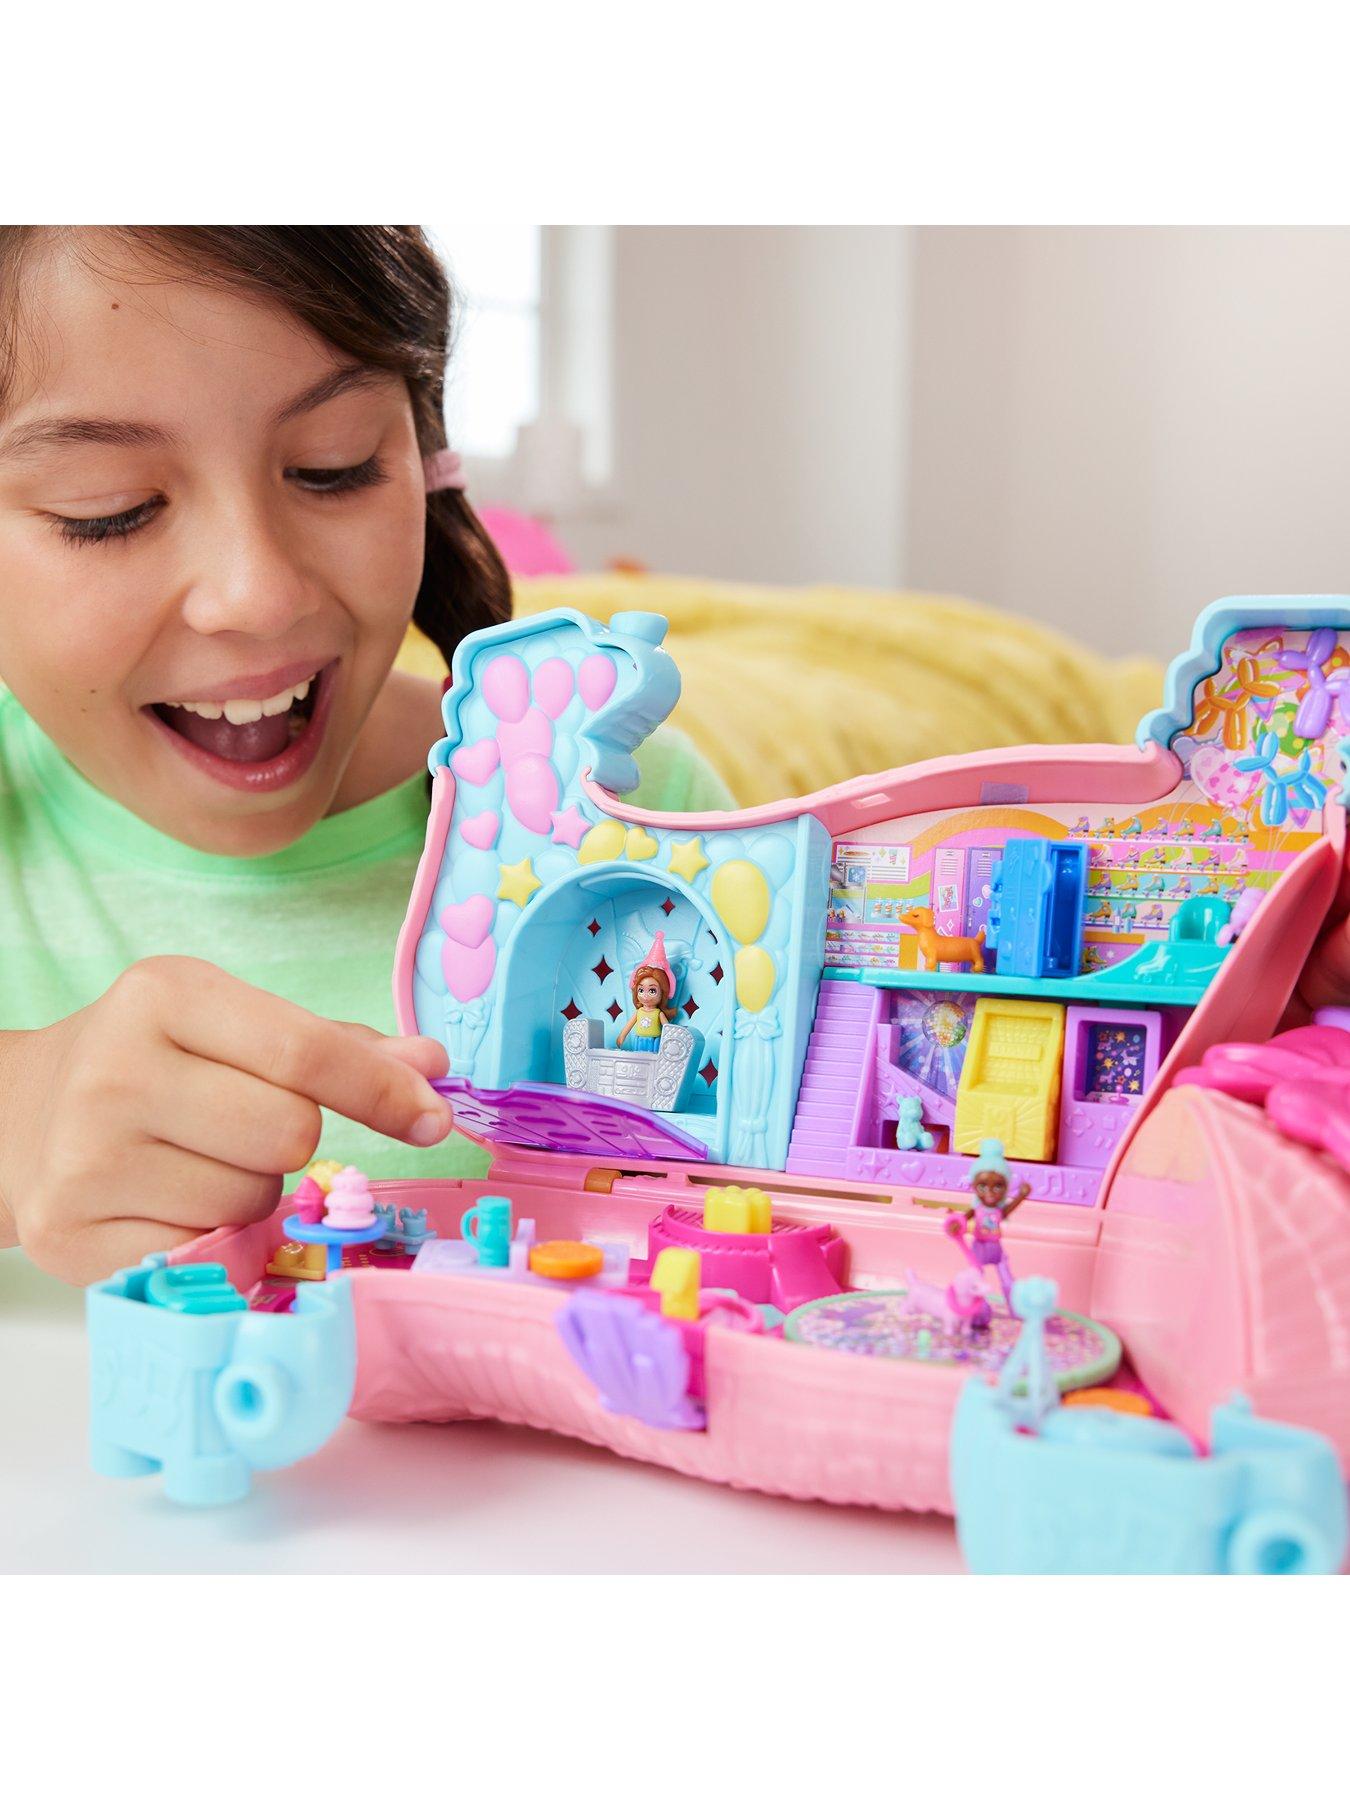 Polly Pockets Are Making a Comeback and They Are Just as Good as You  Remember